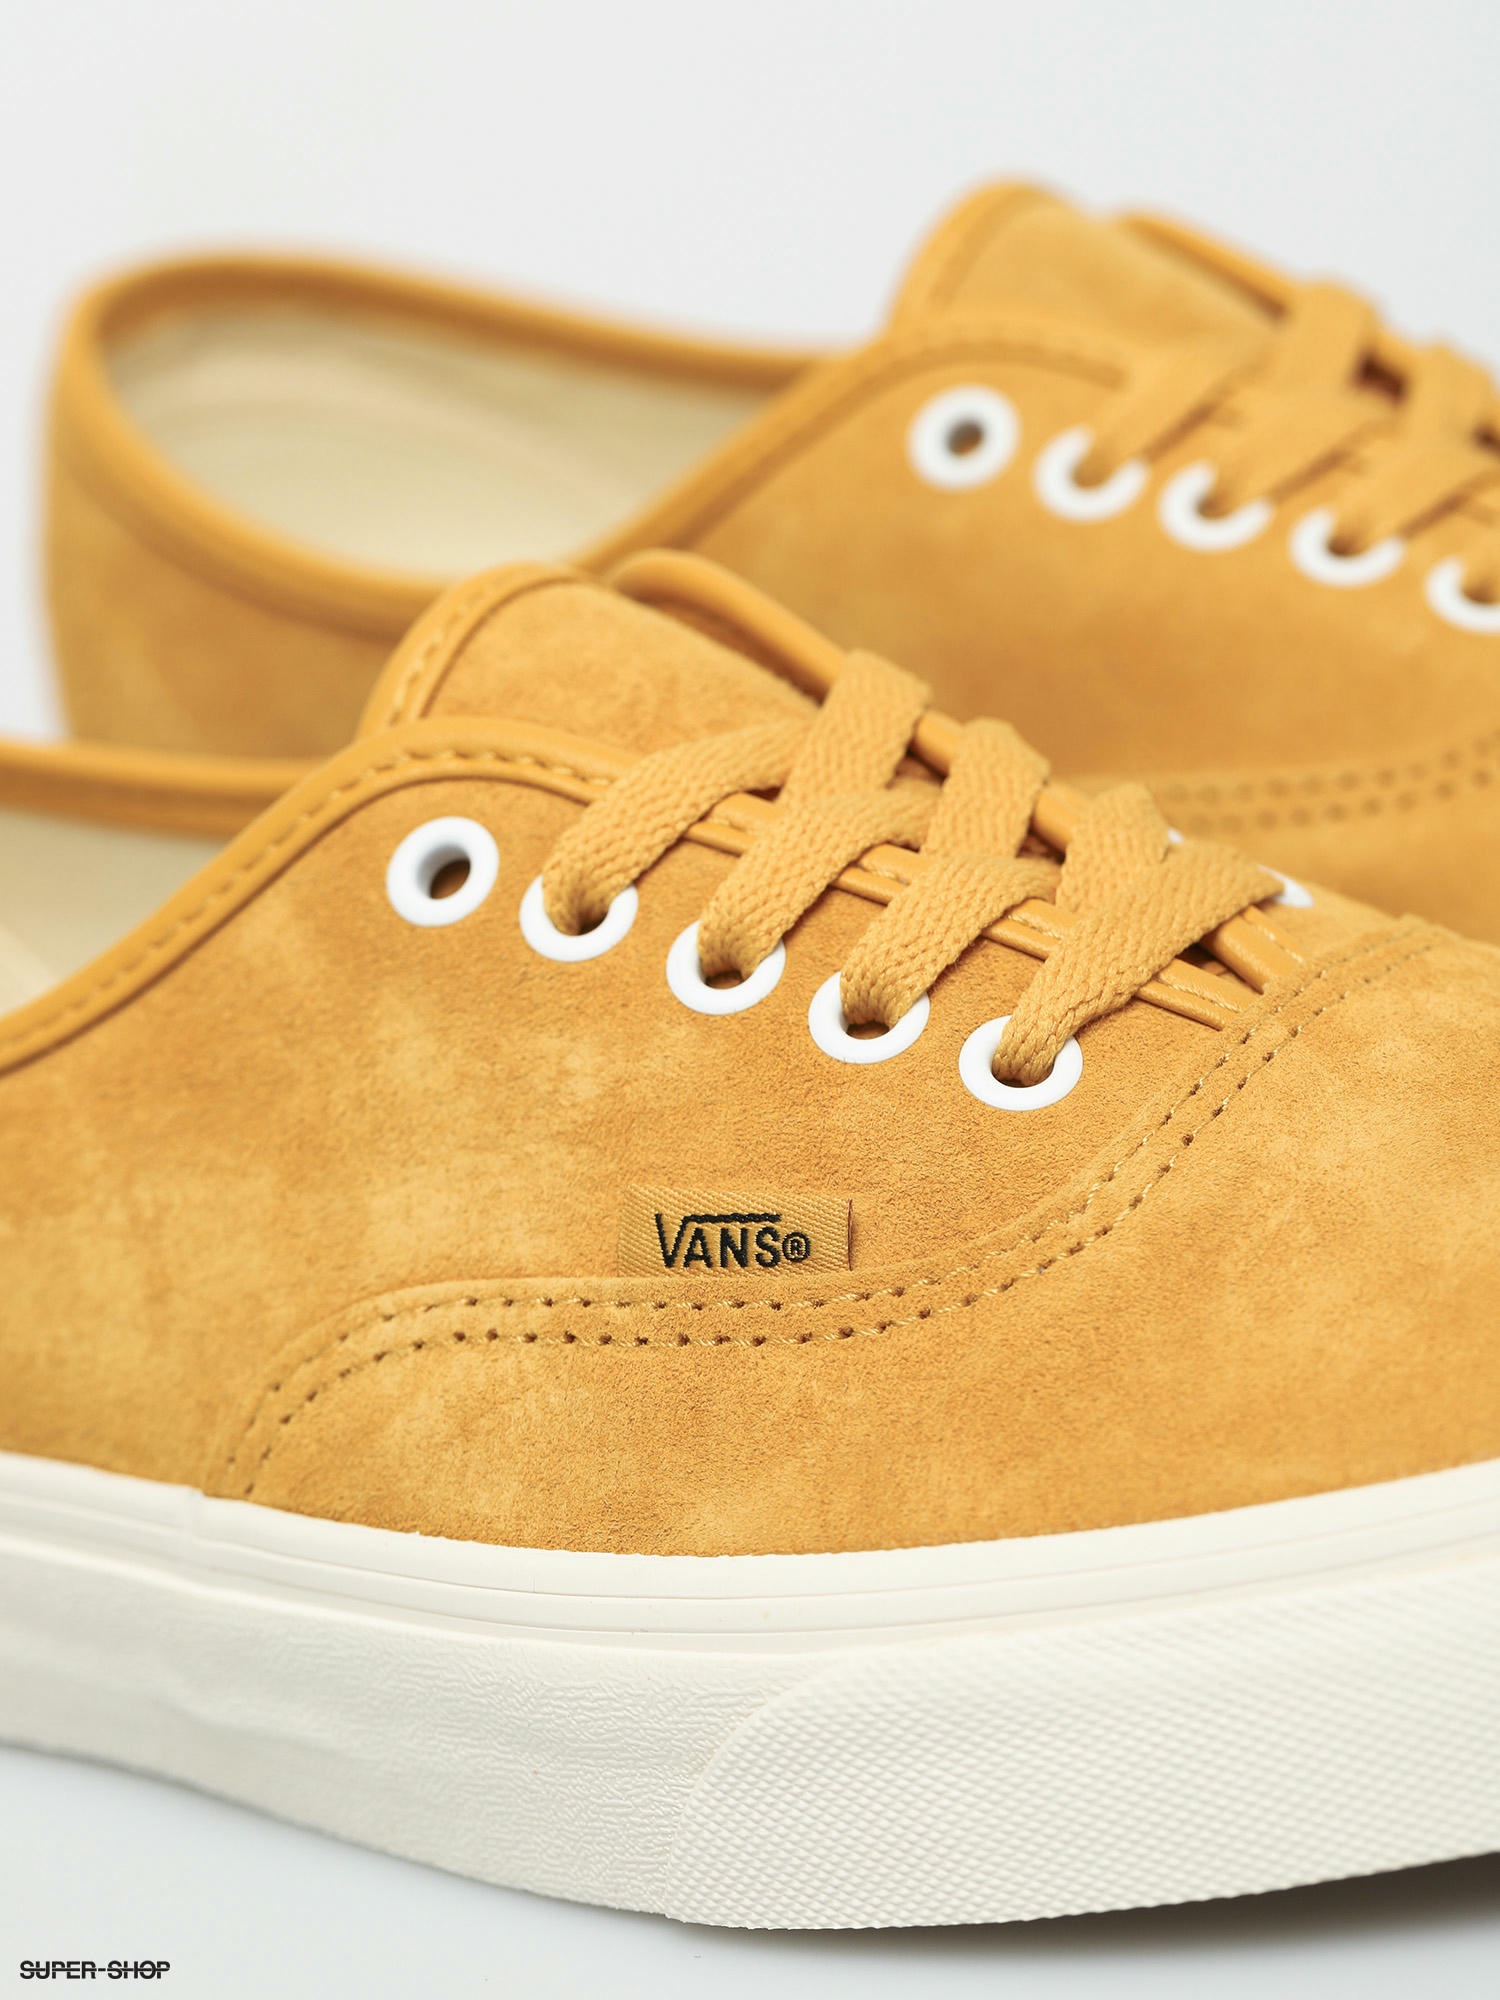 how to clean yellow suede vans